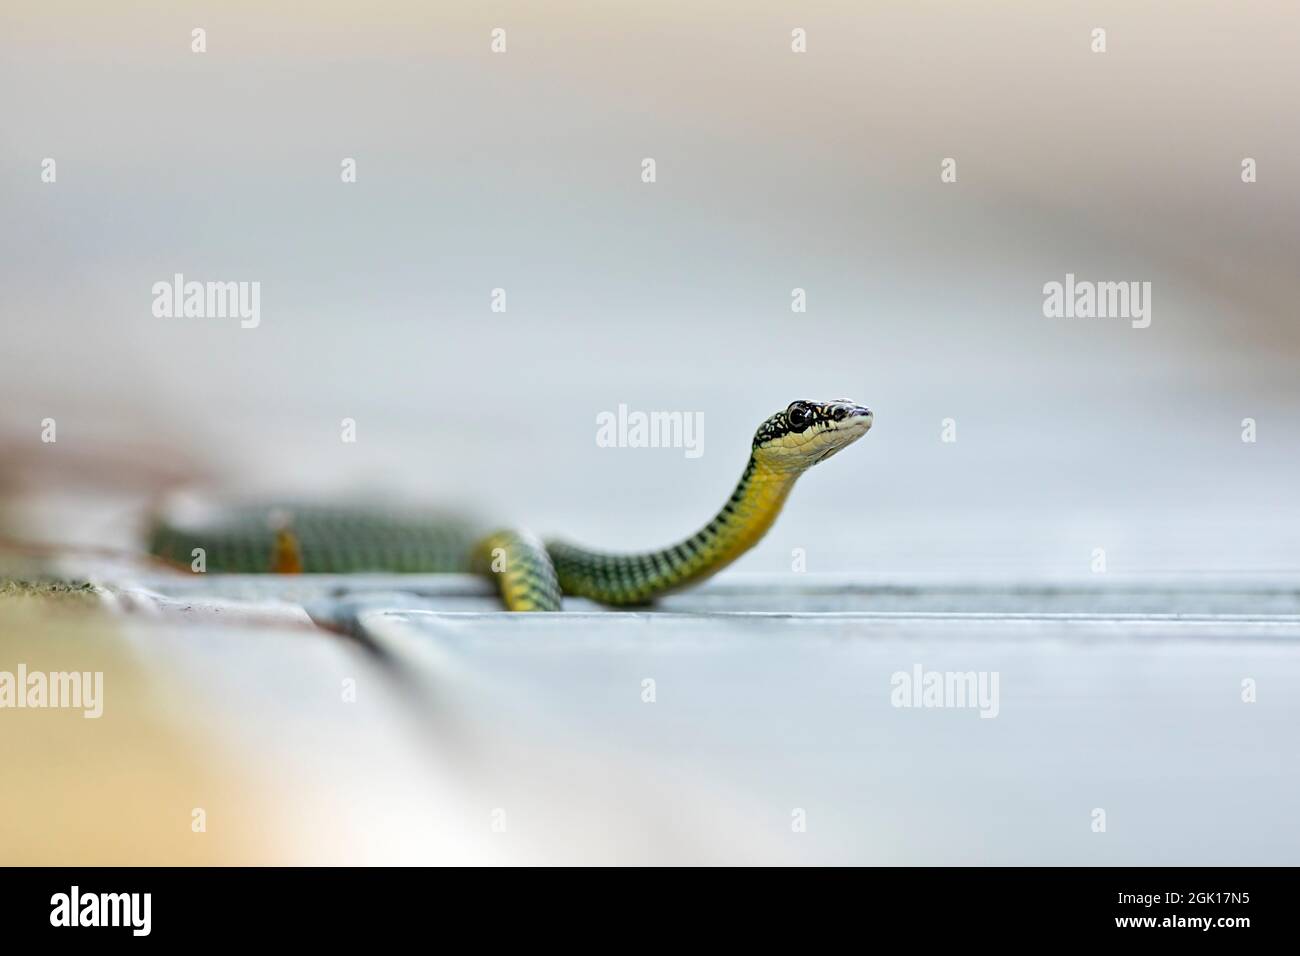 Paradise Flying Tree Snake exploring a drain along a path in a park, Singapore. Stock Photo